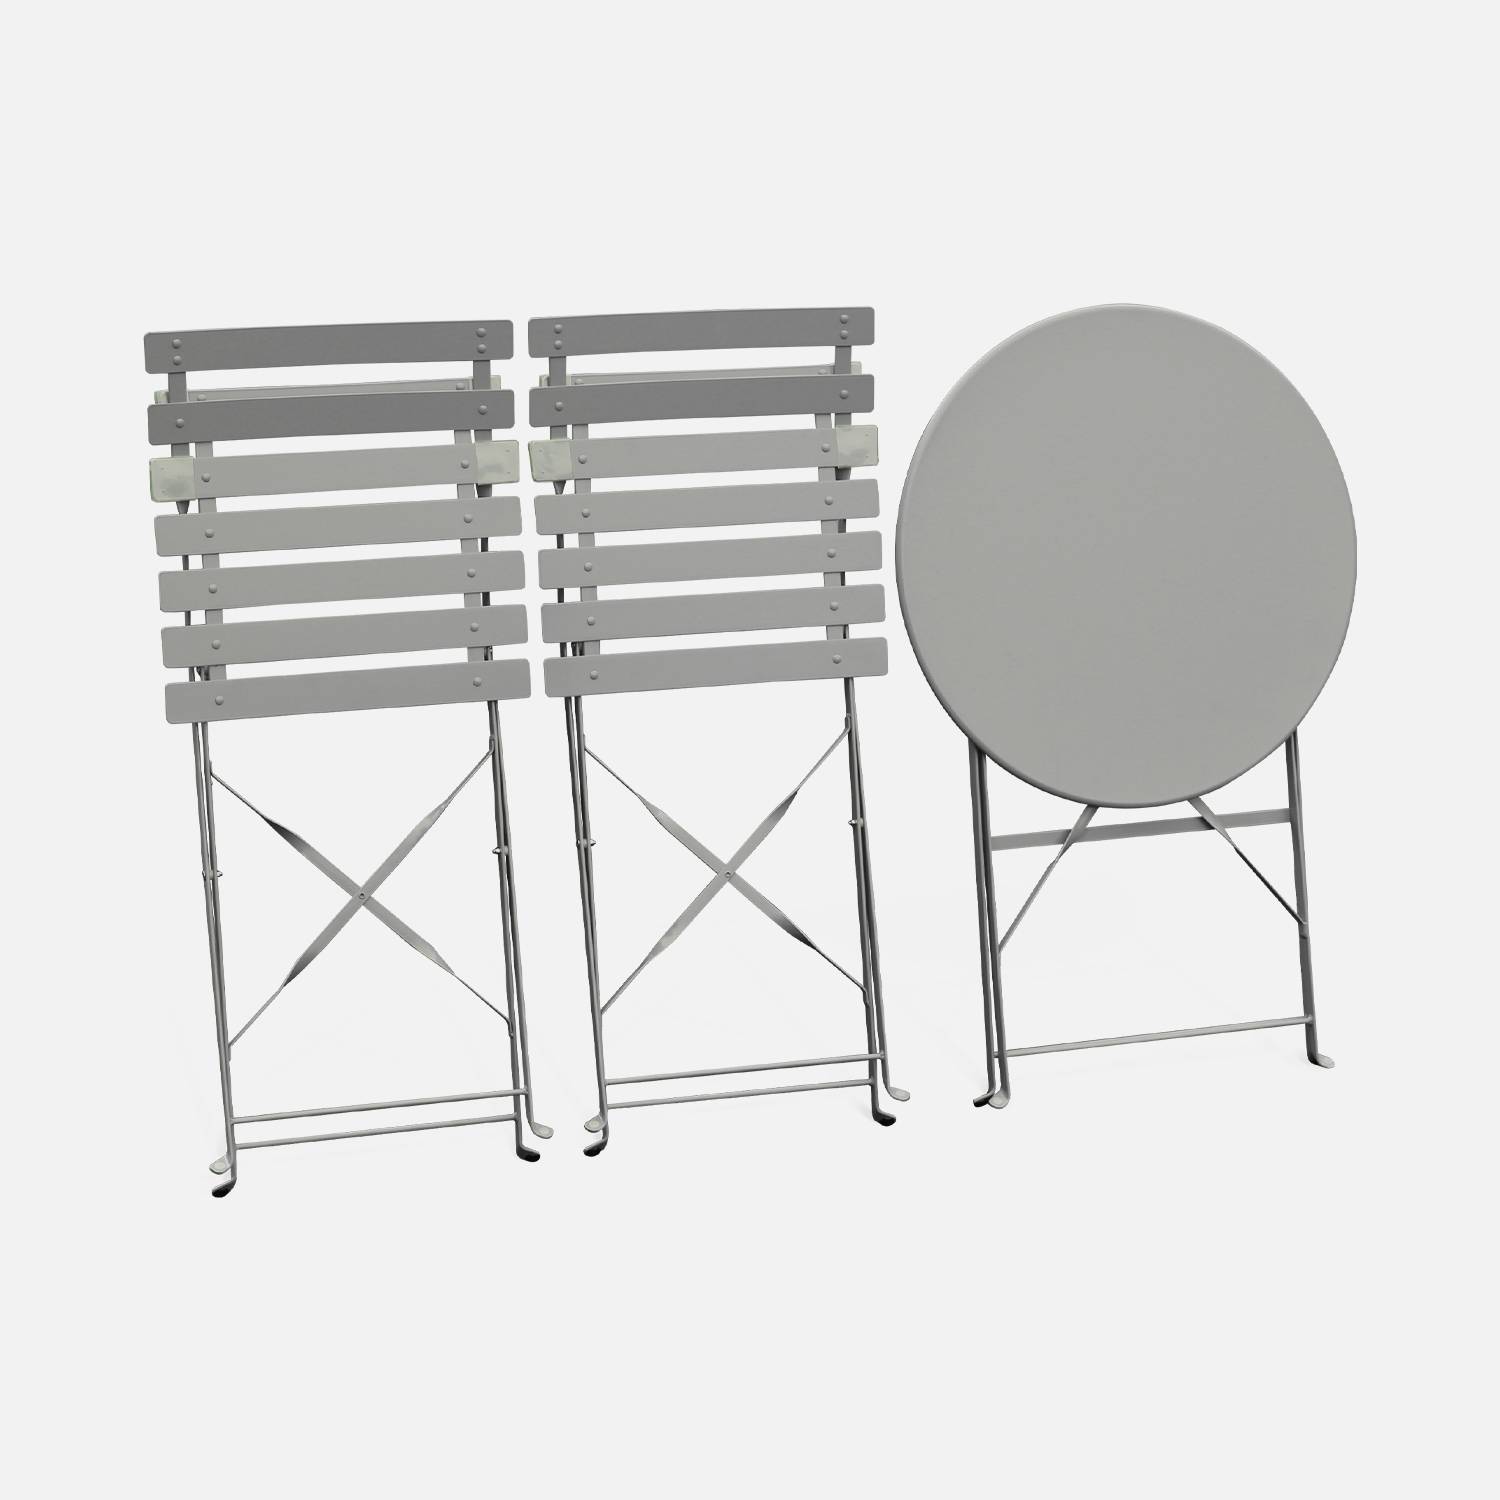 2-seater foldable thermo-lacquered steel bistro garden table with chairs, Ø60cm - Emilia - Taupe grey,sweeek,Photo6